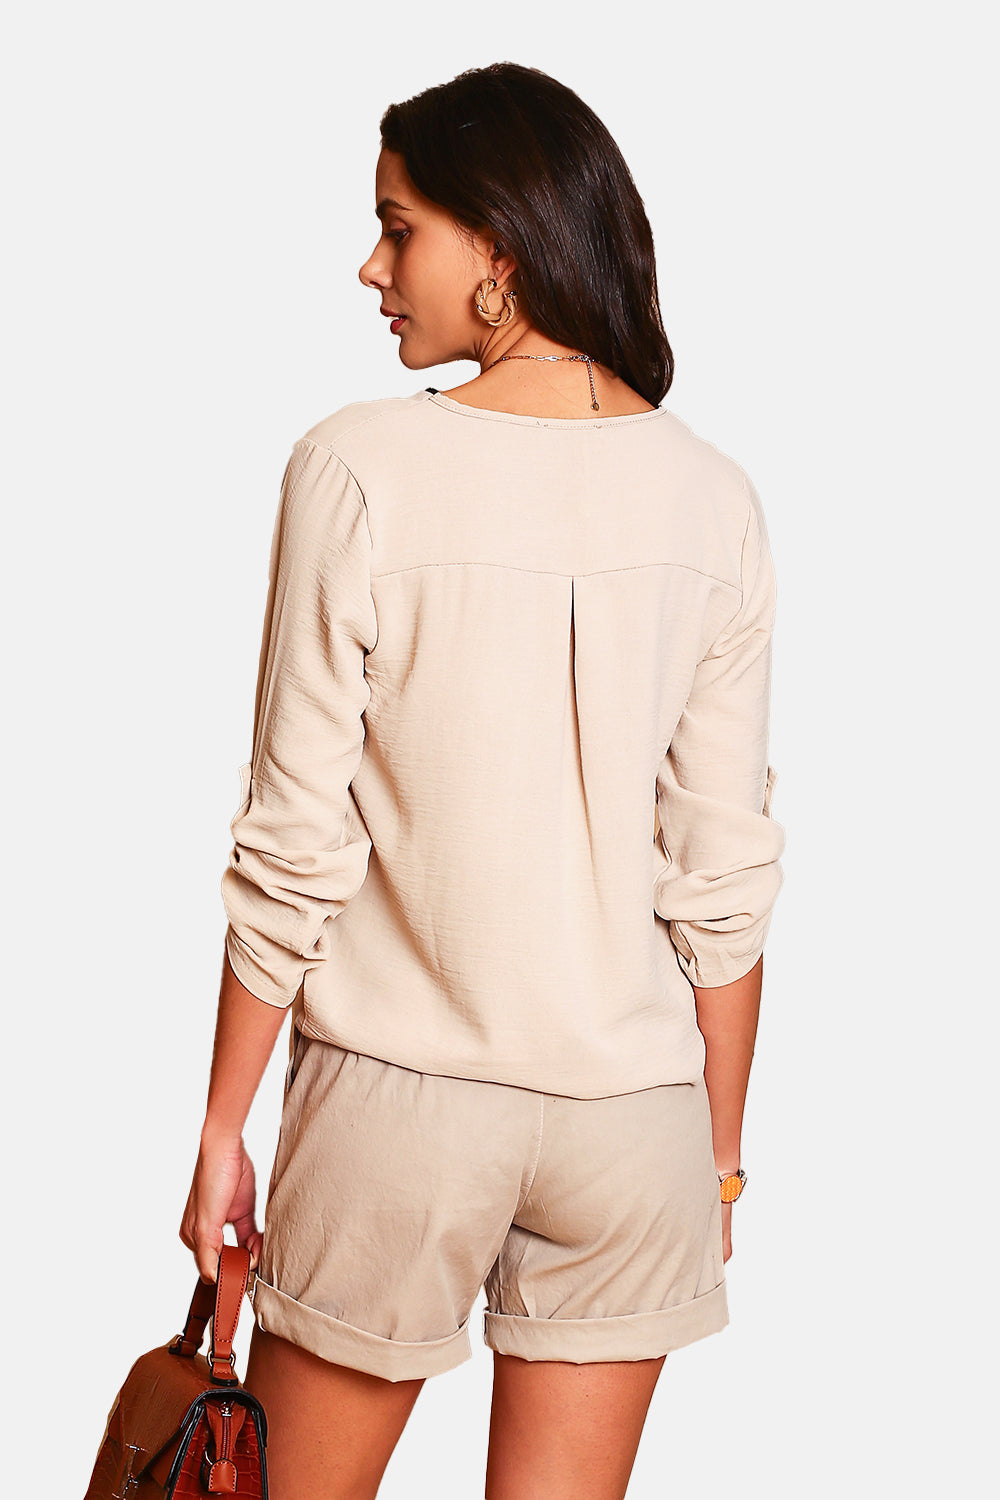 Zipped V neckline shirt with 3/4 sleeves